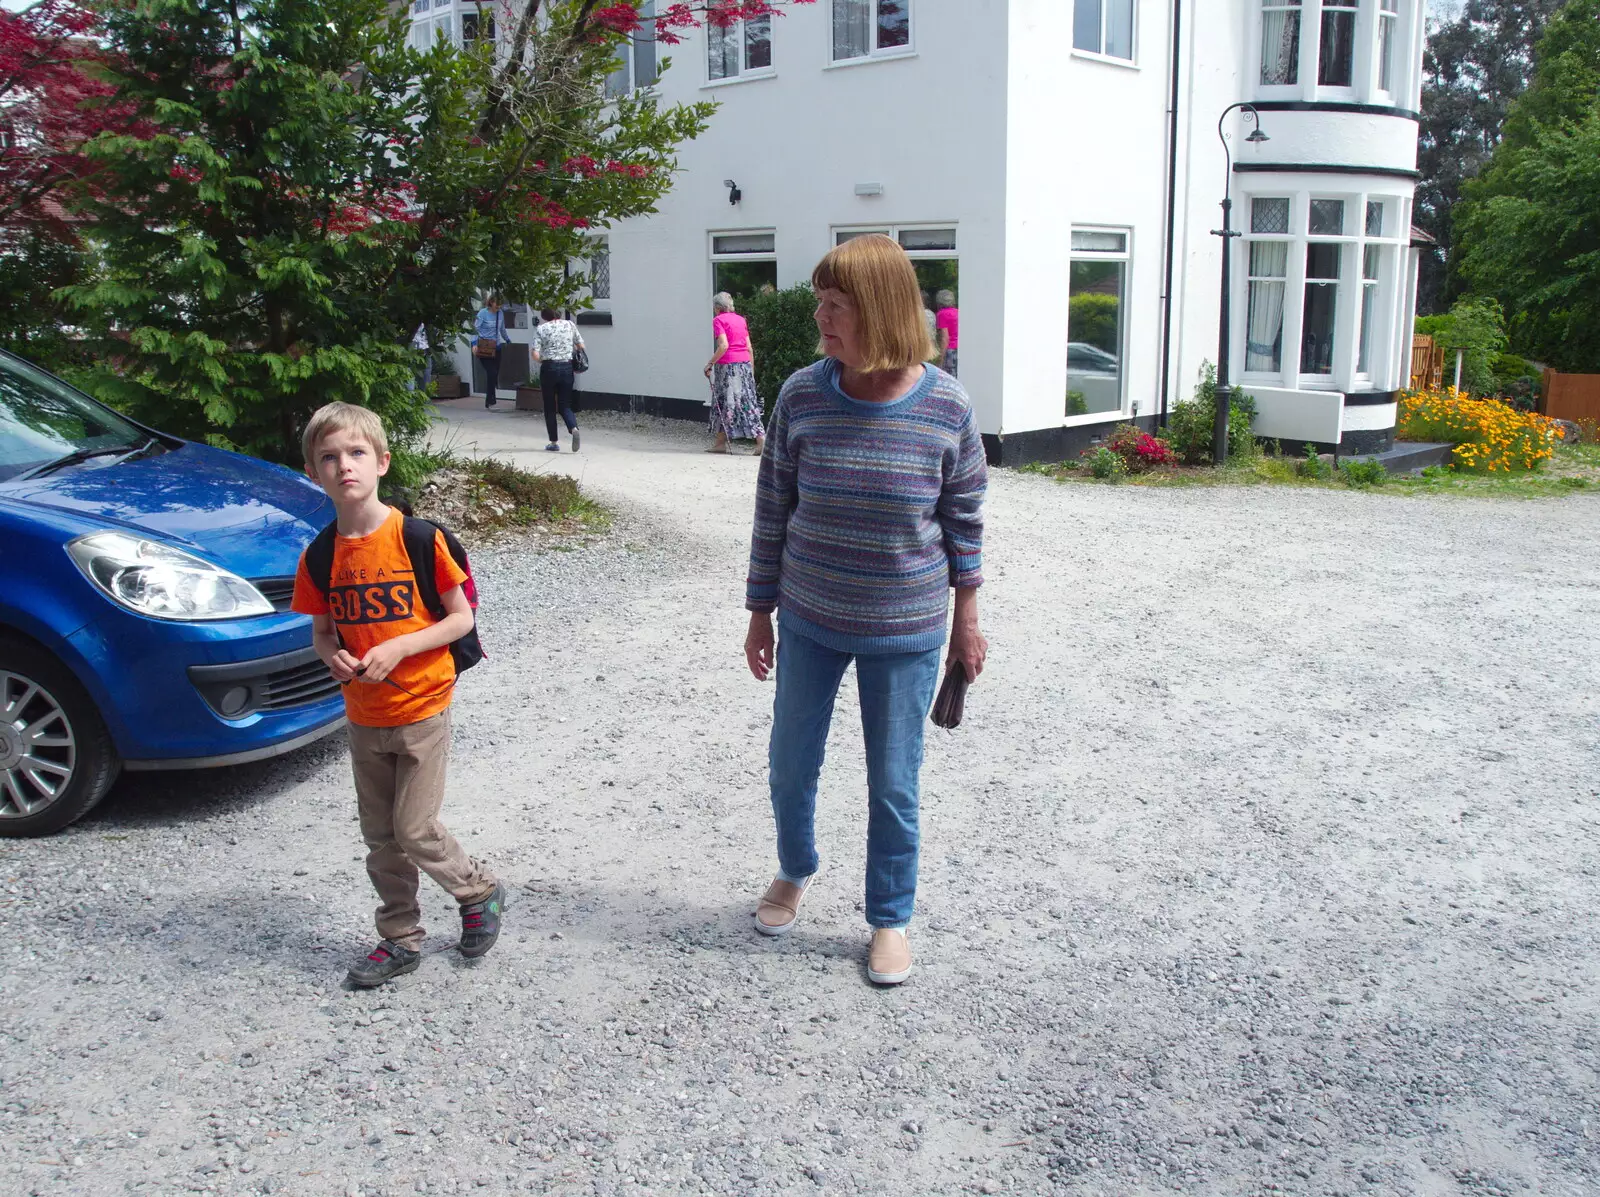 Harry with Grandma J, from Chagford Lido and a Trip to Parke, Bovey Tracey, Devon - 25th May 2019